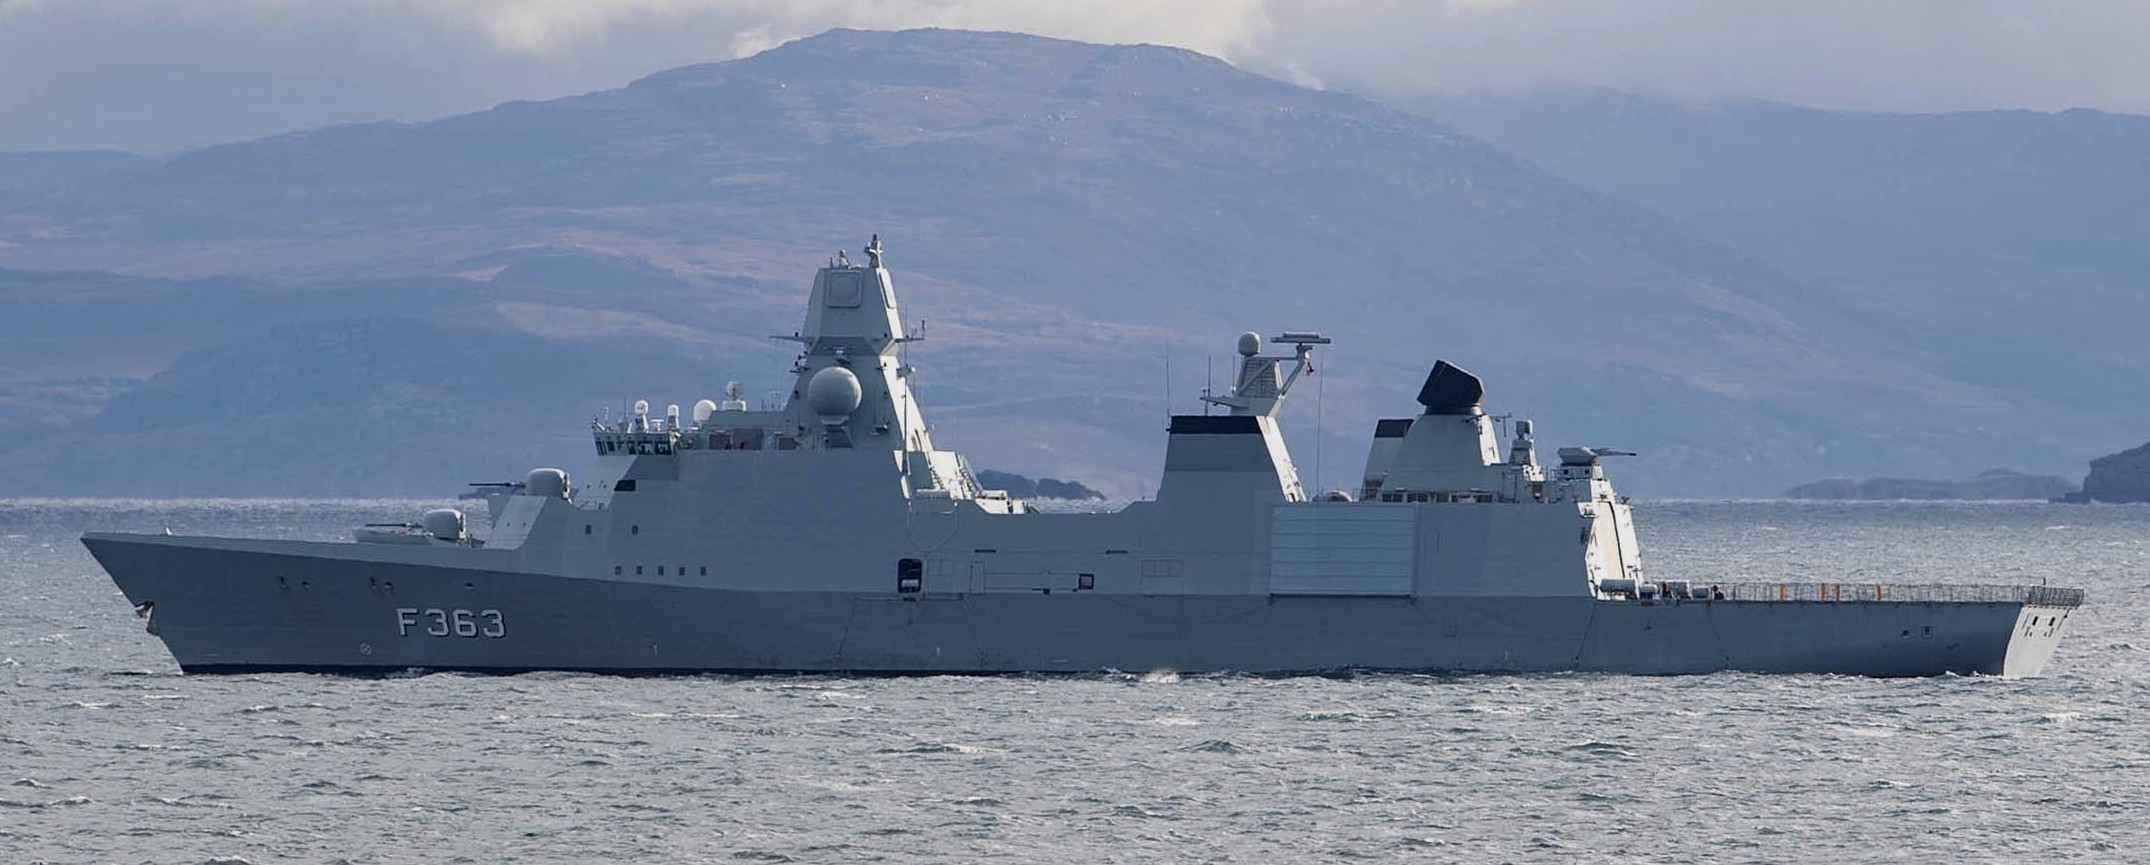 f-363 hdms niels juel iver huitfeldt class guided missile frigate ffg royal danish navy 03